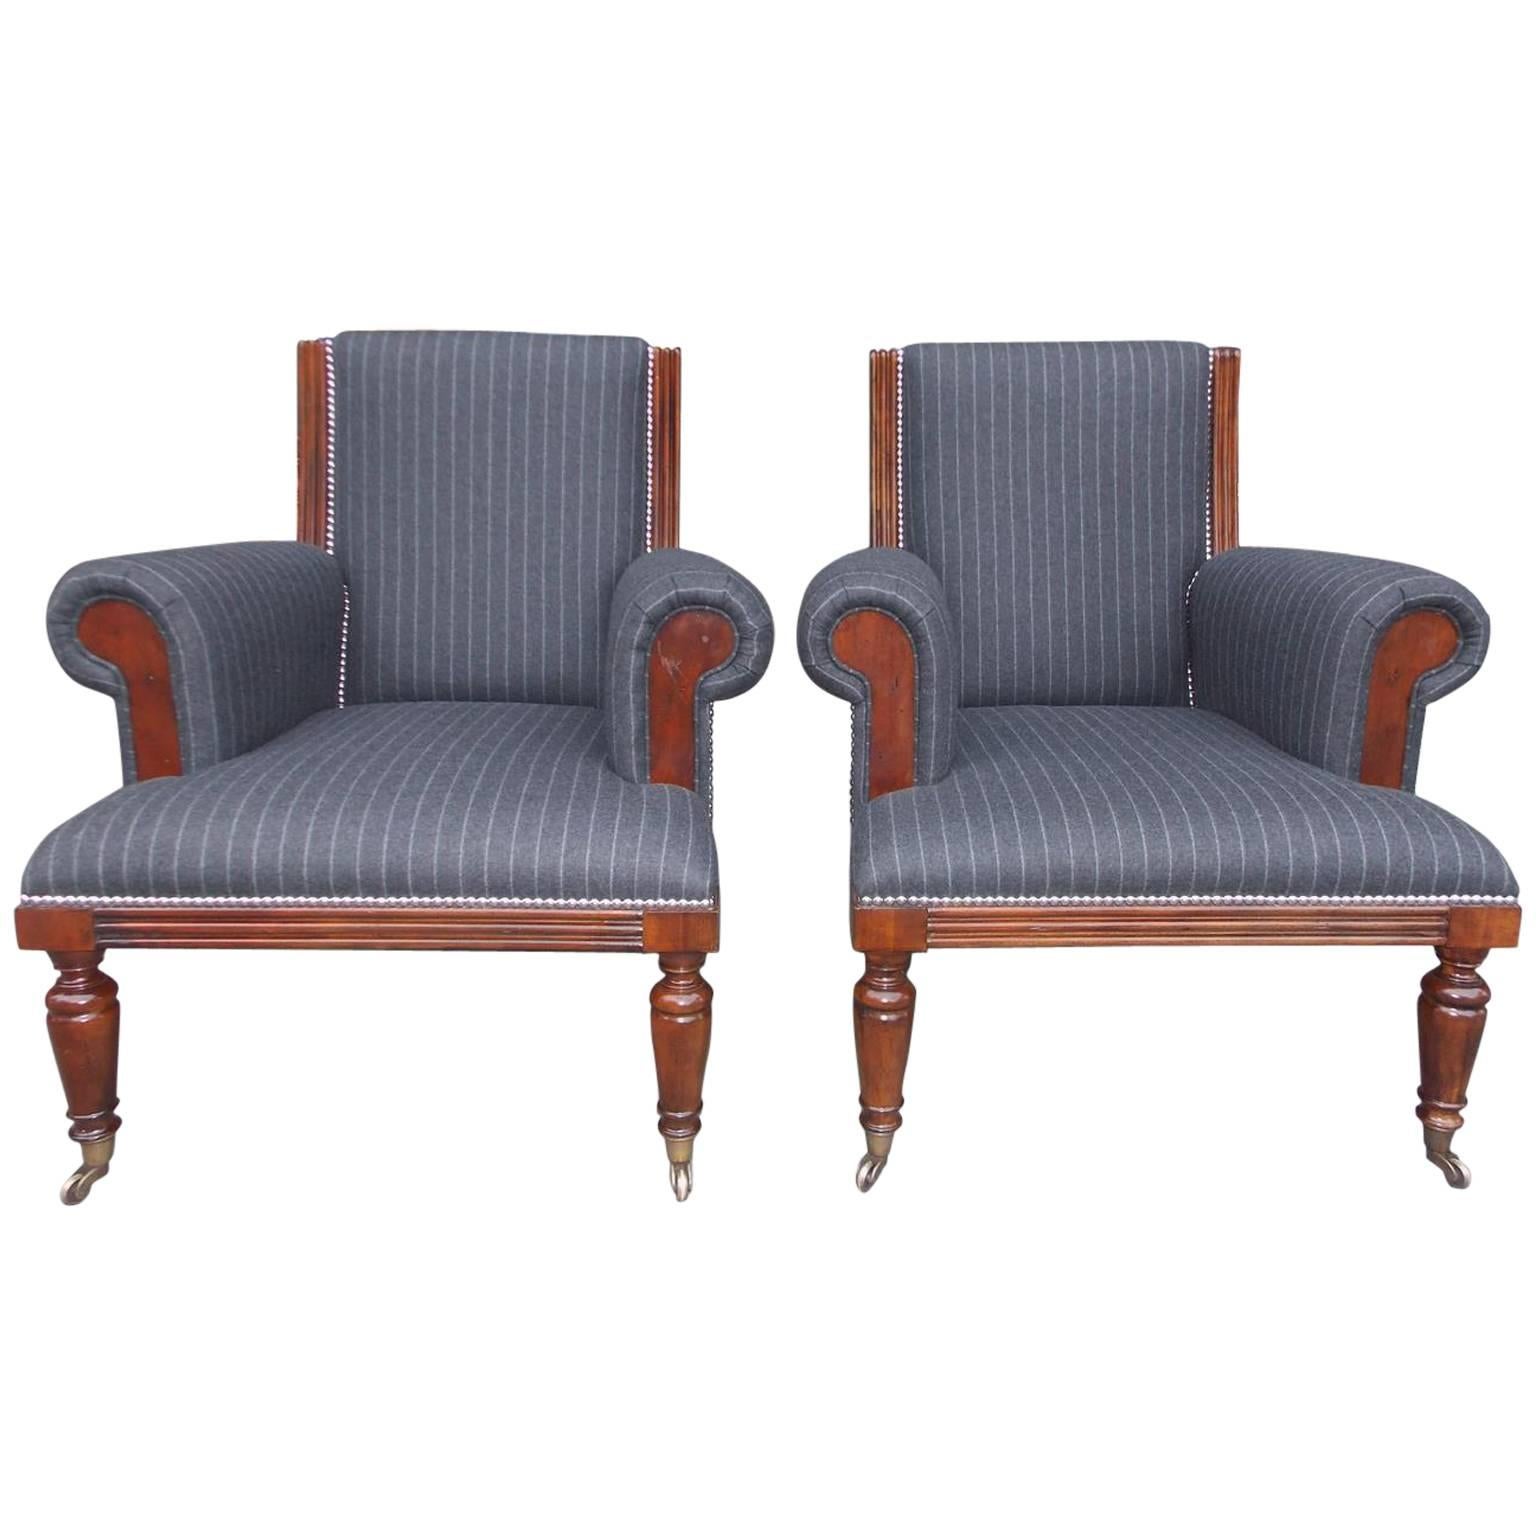 Pair of American Mahogany Upholstered Club Chairs, 20th Century